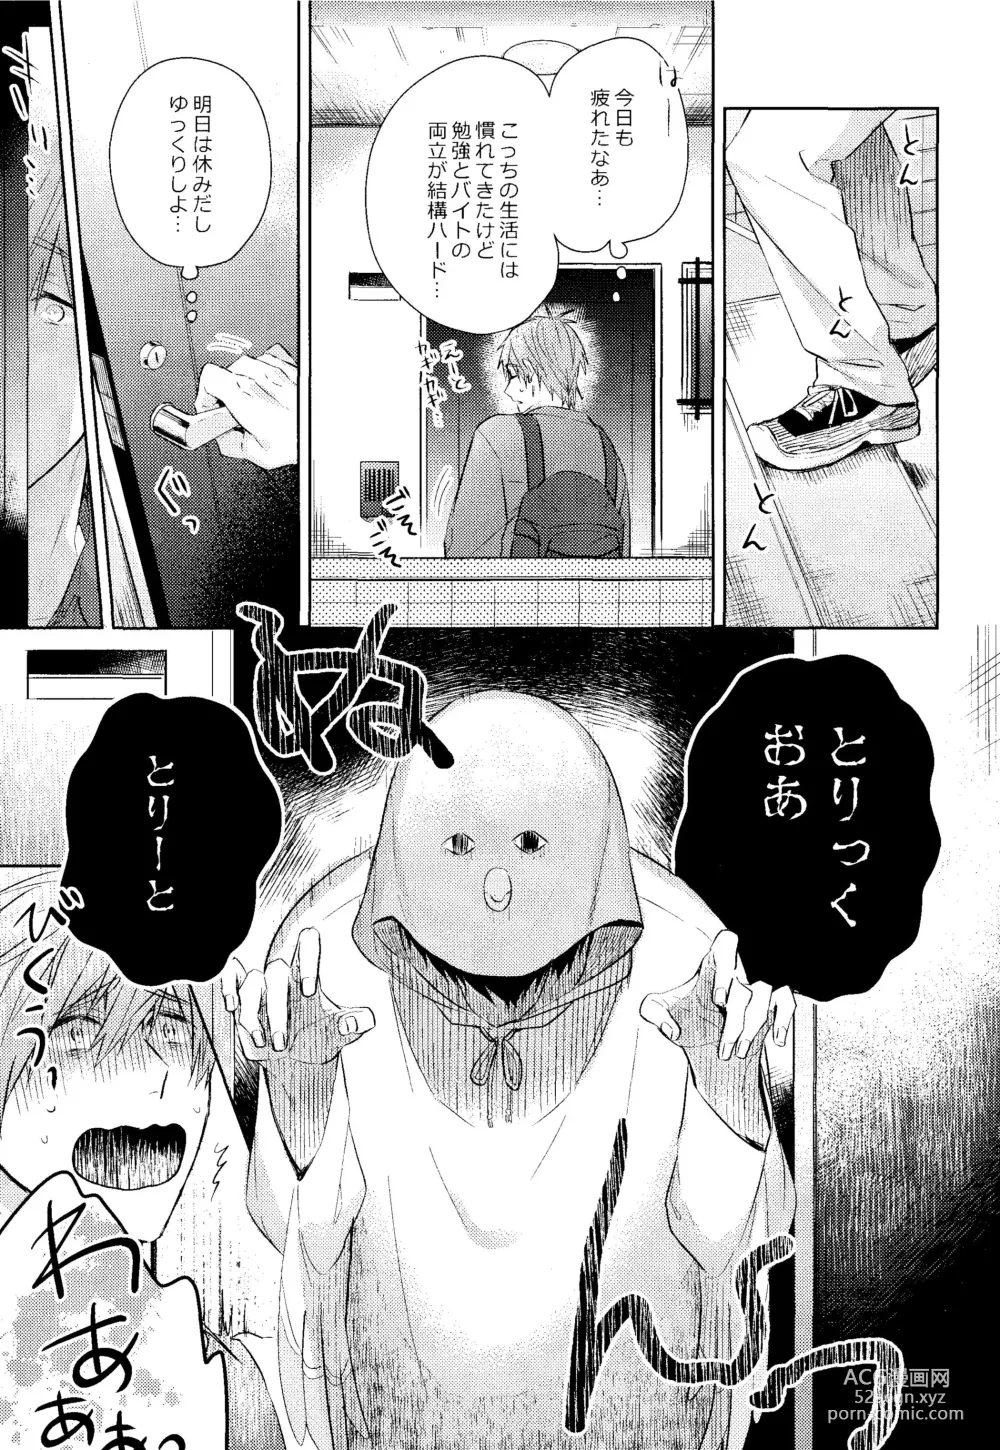 Page 3 of doujinshi Trick or...